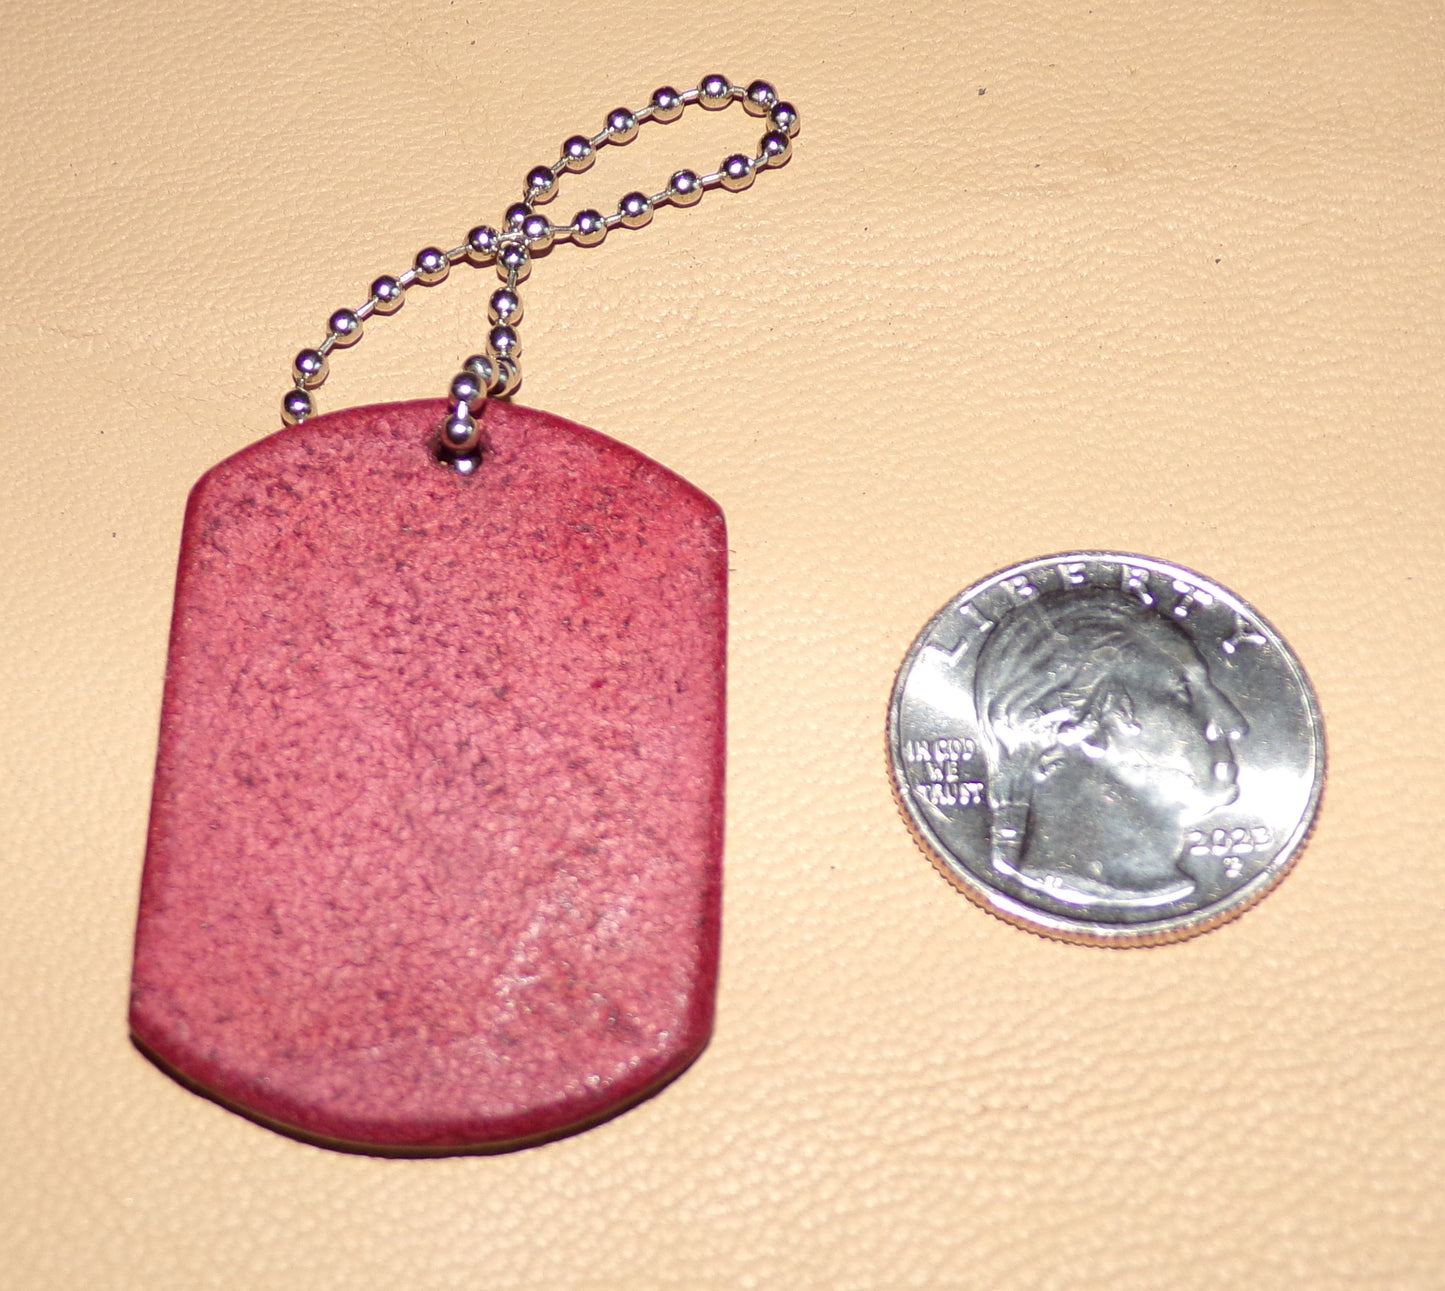 Styx Dog Tag Keychain Brick Red leather medium w/Ouroboros with wings